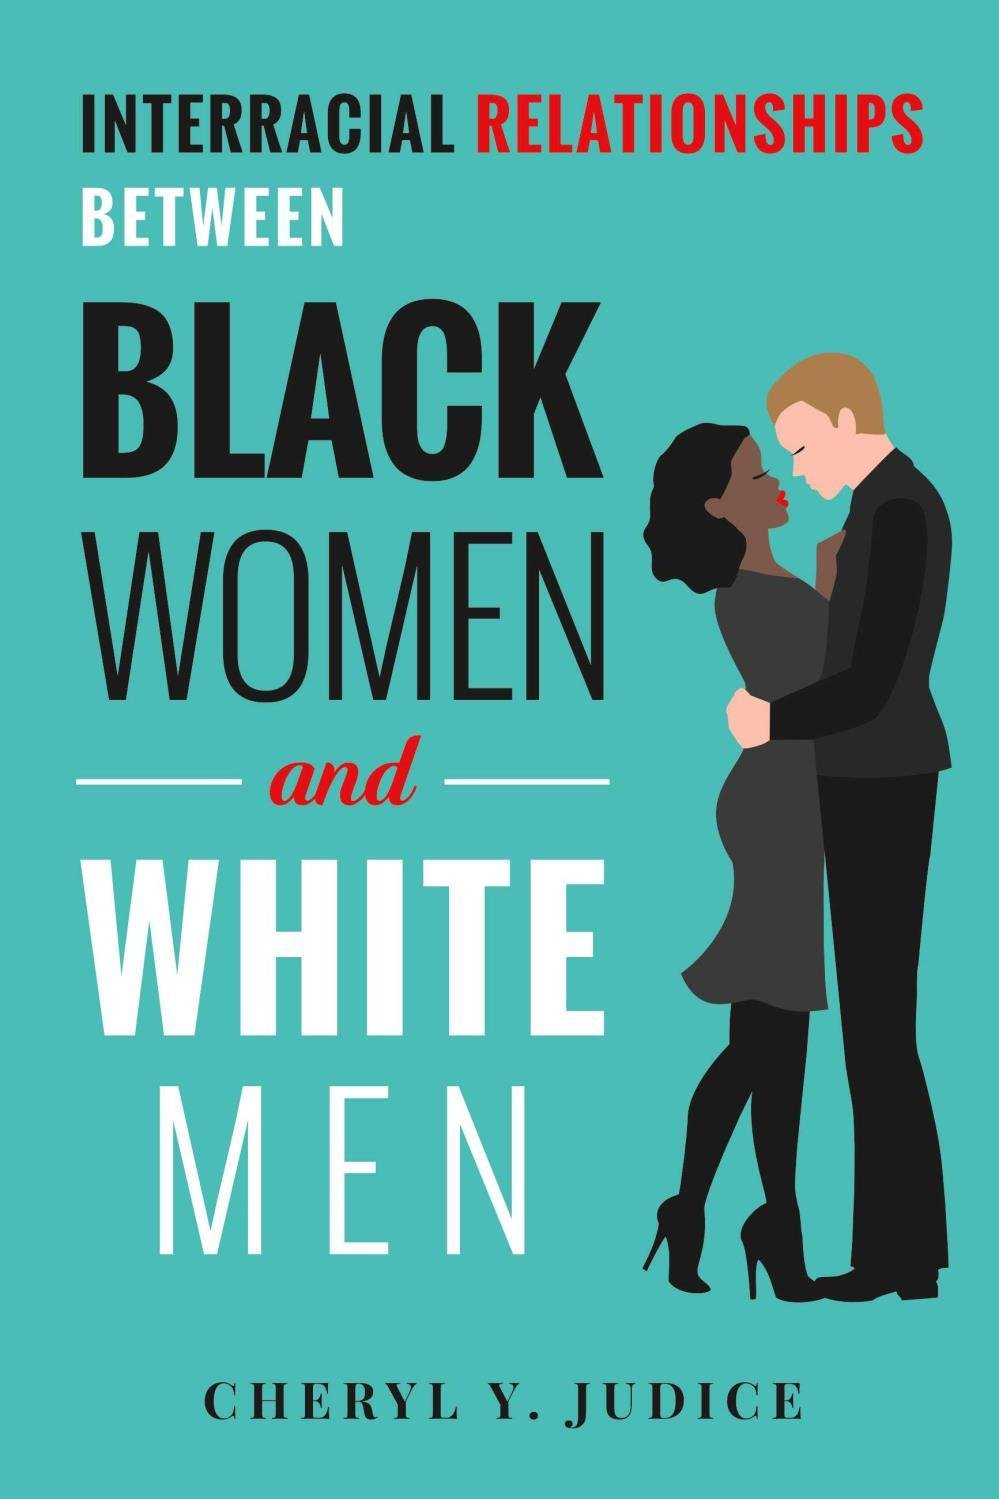 dawn manalo add images of black man and white woman photo